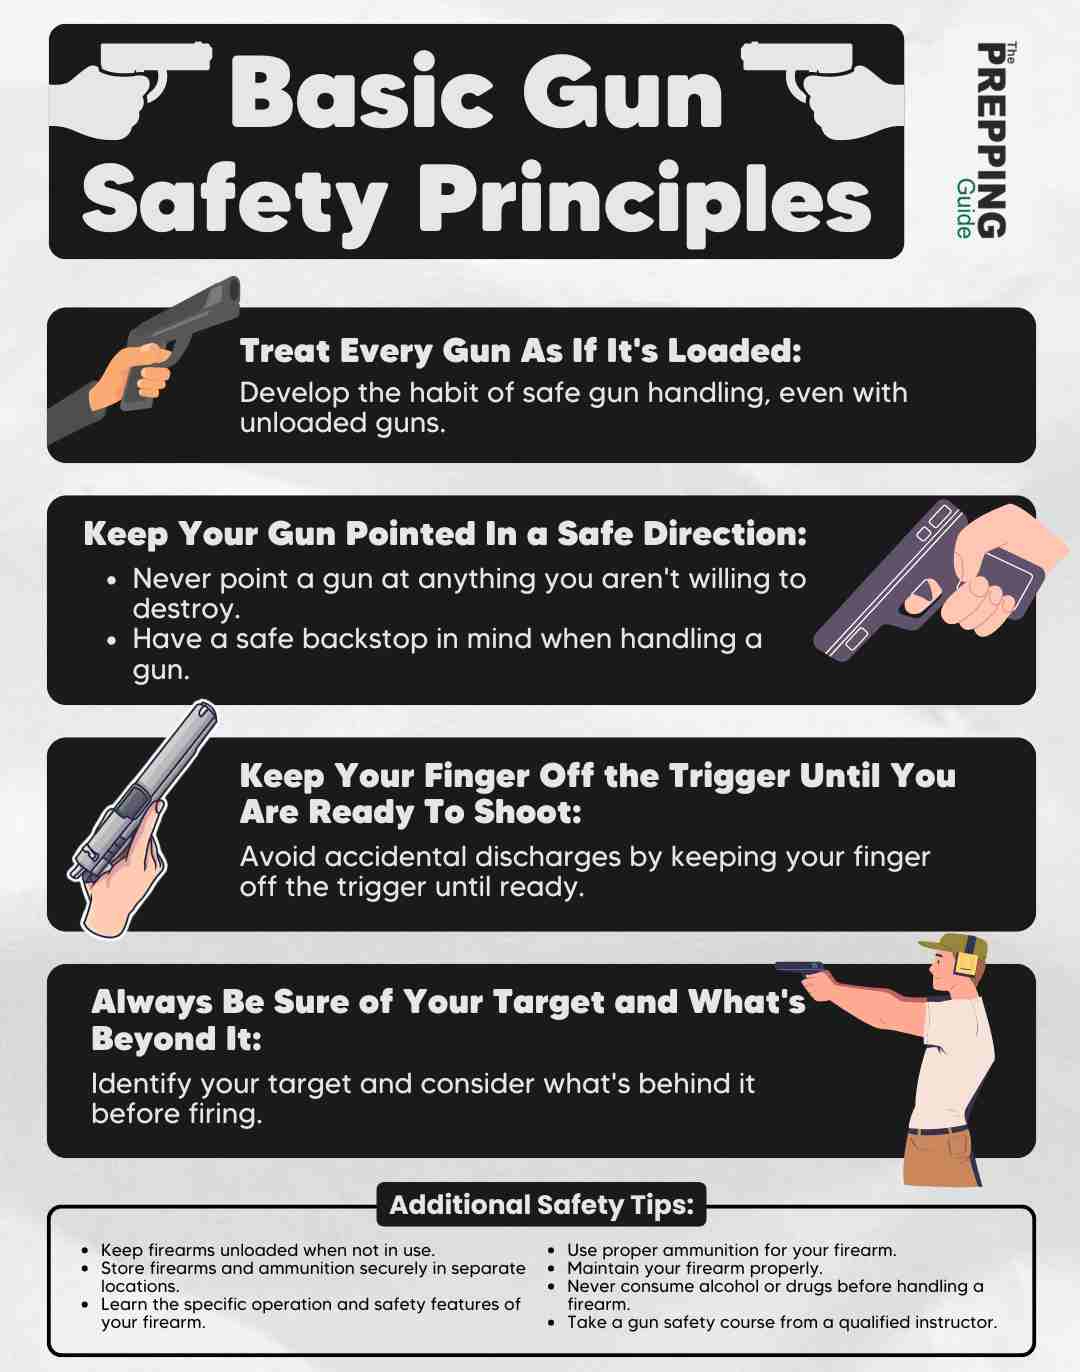 Basic gun safety principles on how to win a gun fight.